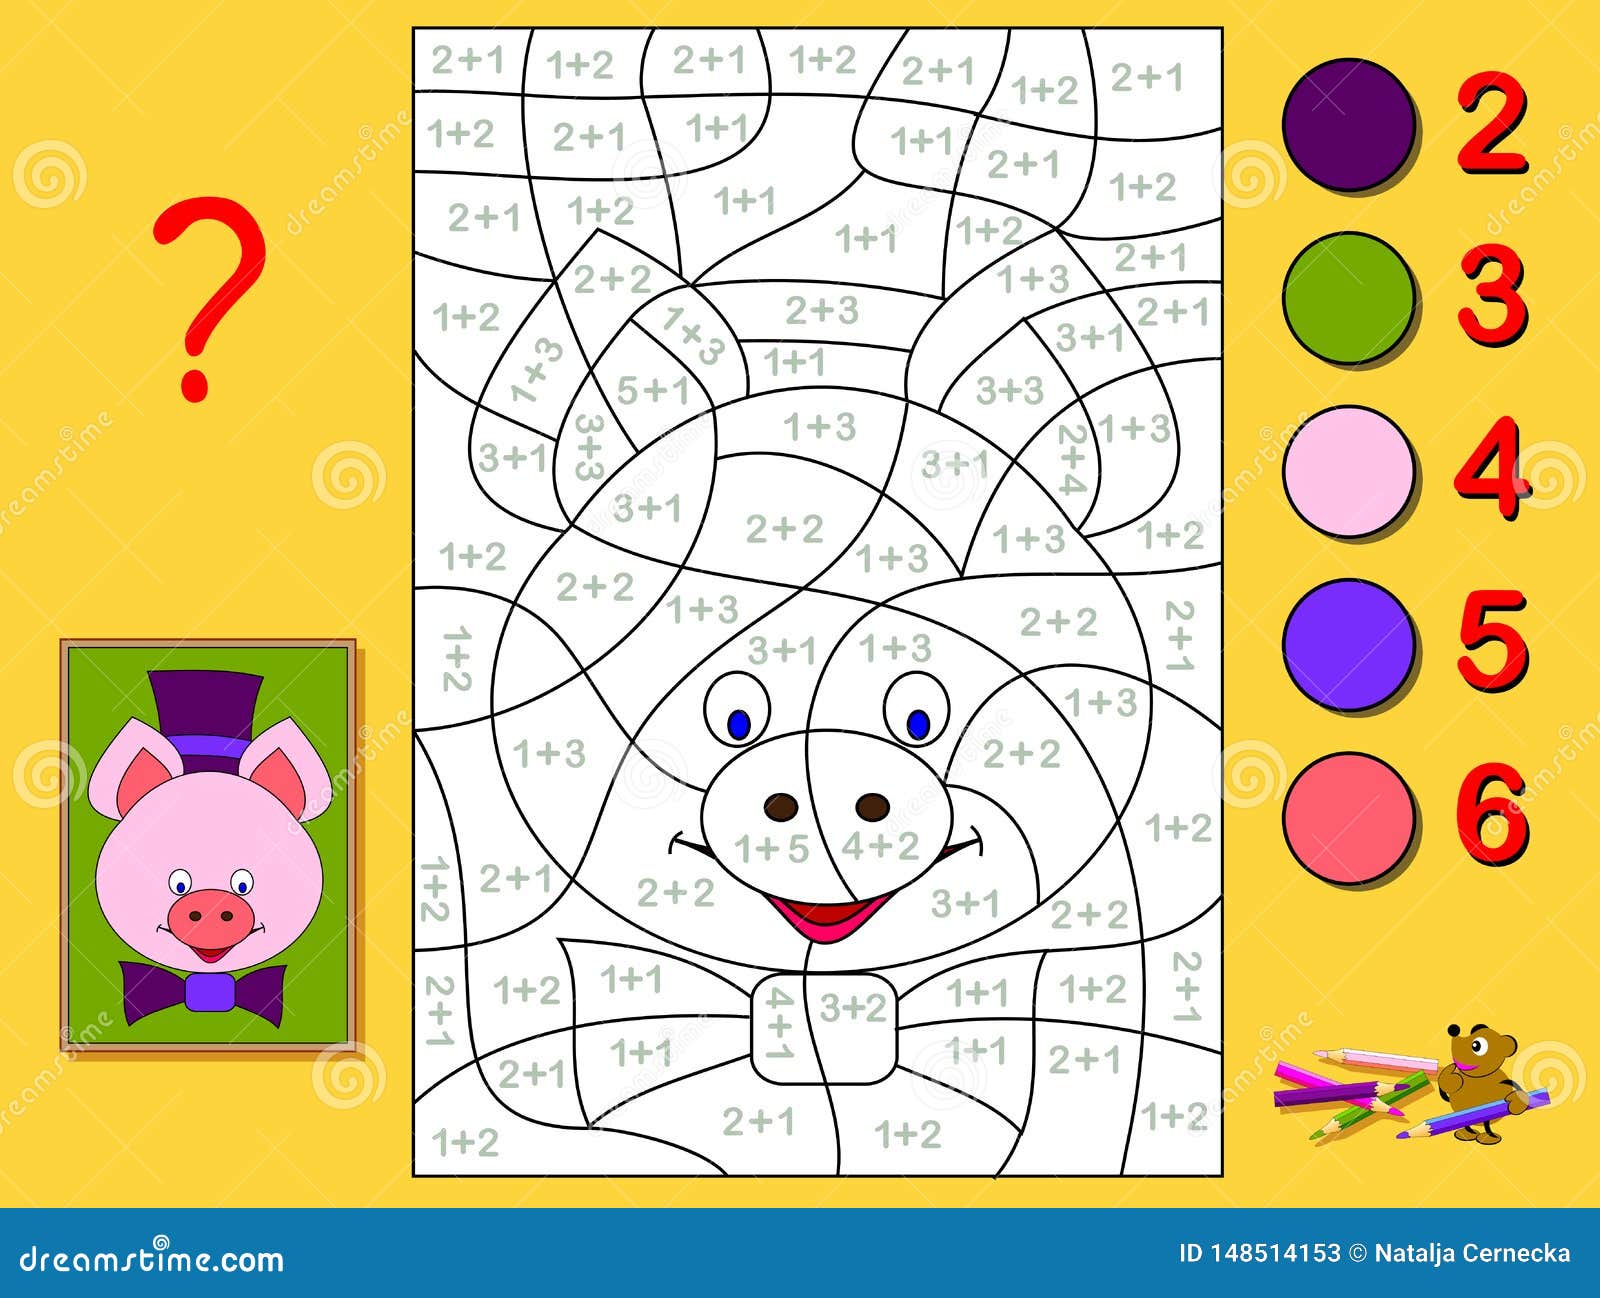 educational page with exercises for children on addition. need to solve examples and paint the portrait of a piglet.